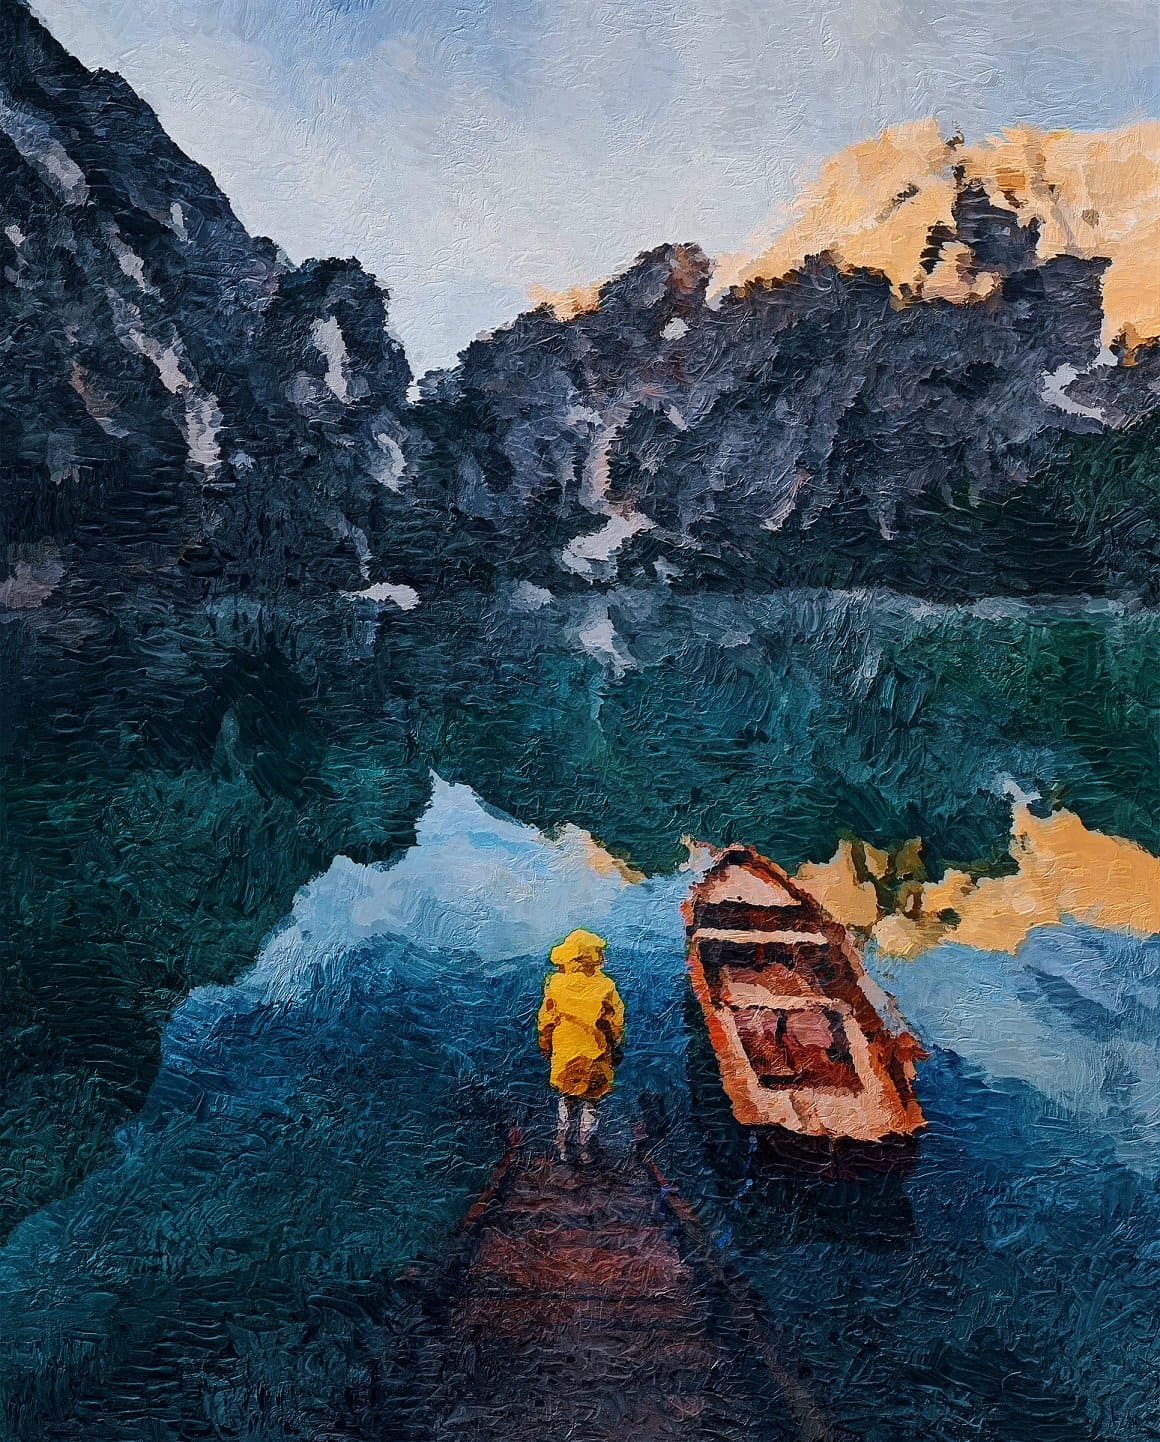 The images of mountains, a lake, a boat and a man in a yellow jacket on the shore are processed in Palette Knife Photoshop Action.